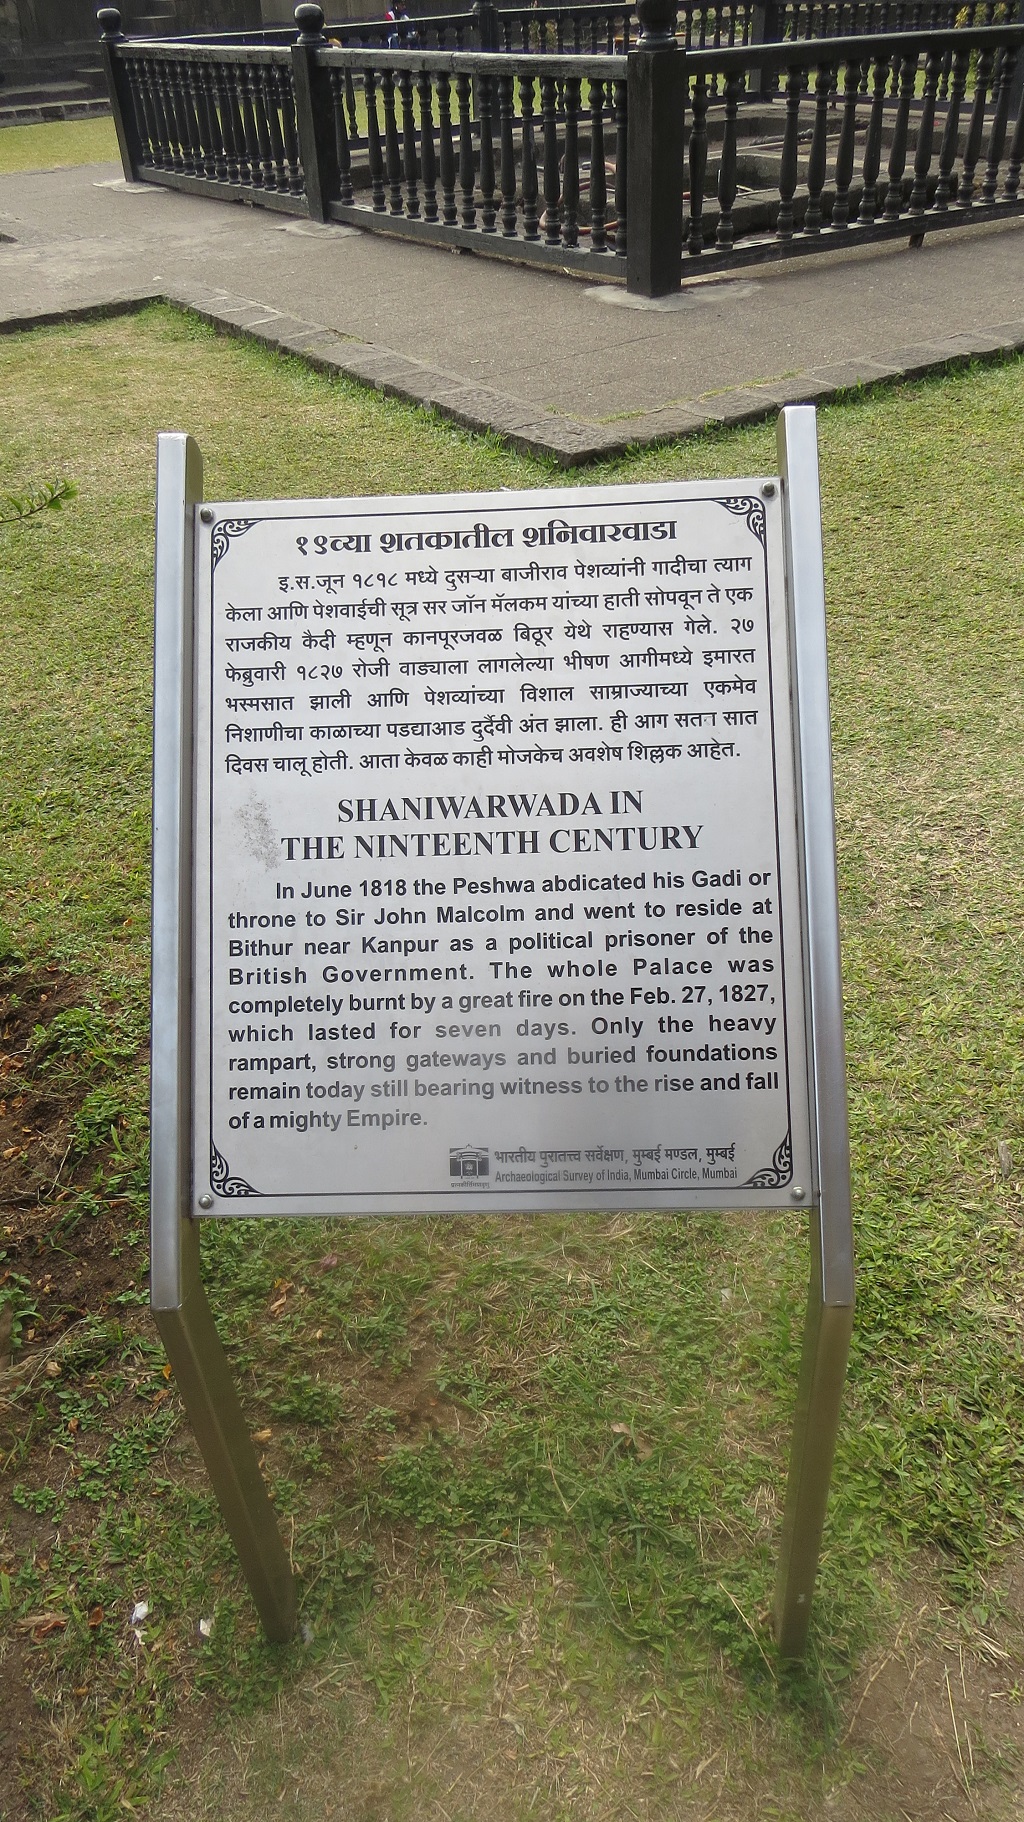 About: Shaniwarwada in the Nineteenth Century